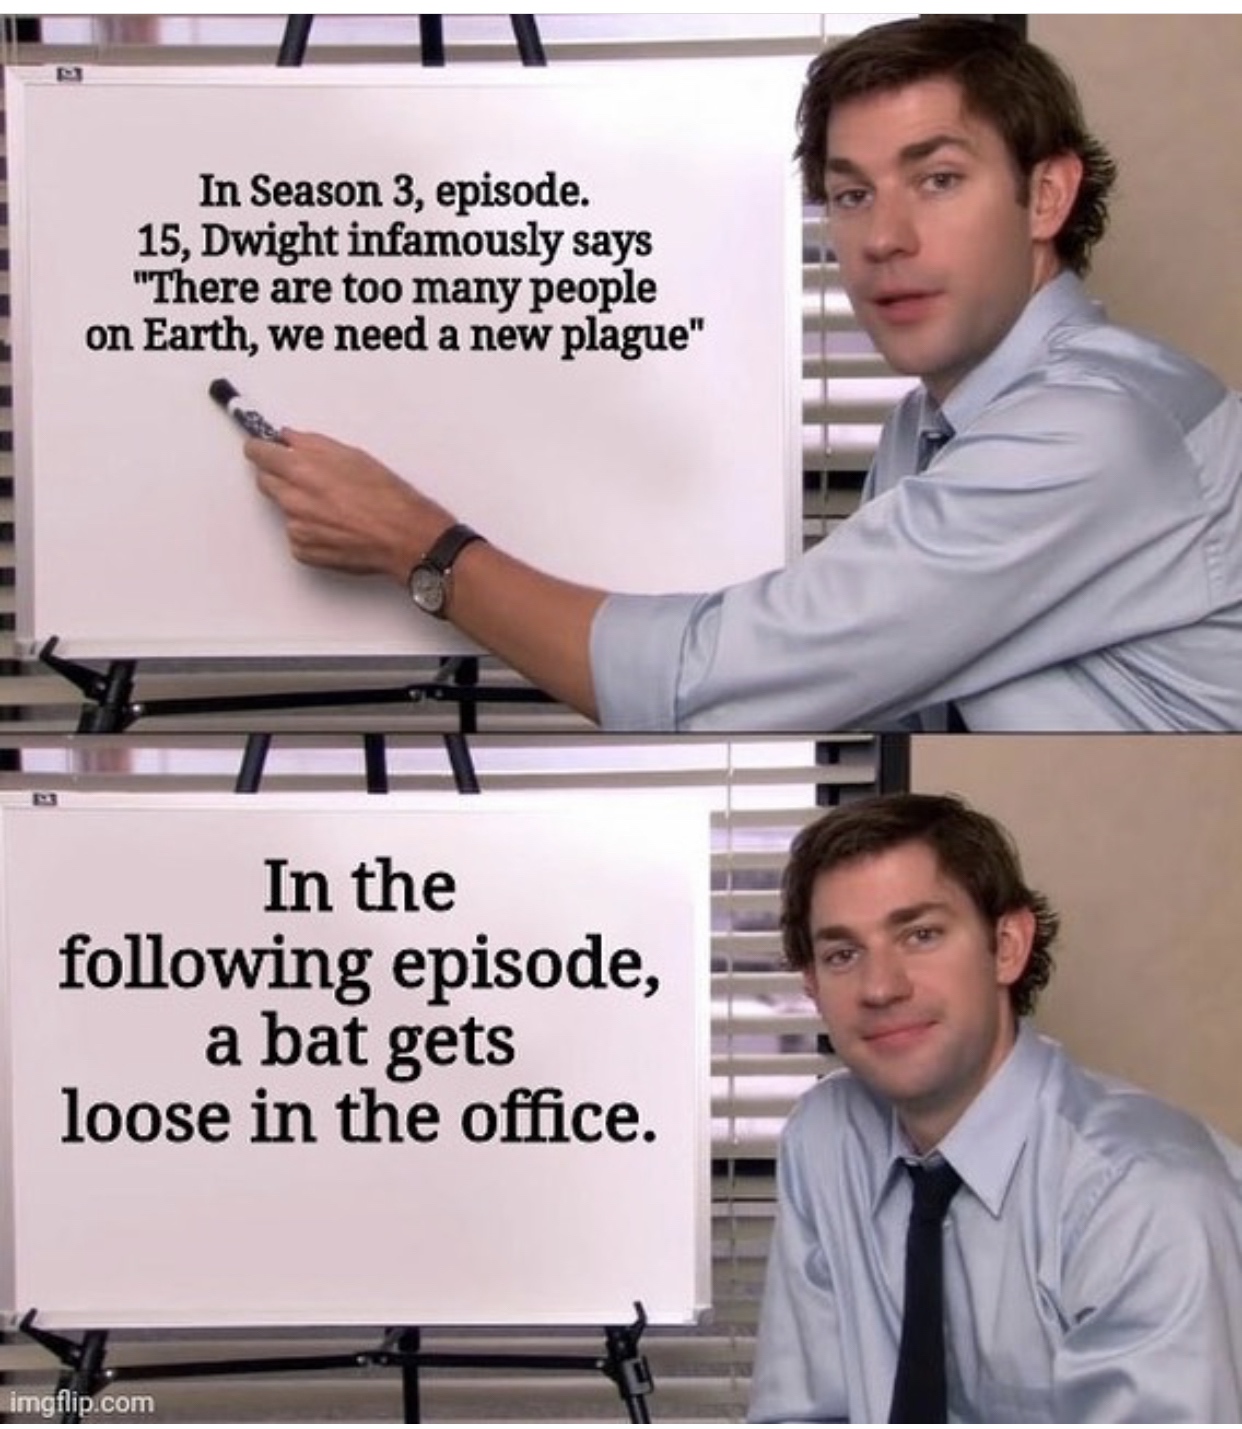 office quotes - In Season 3, episode. 15, Dwight infamously says "There are too many people on Earth, we need a new plague" In the ing episode, a bat gets loose in the office. imgflip.com